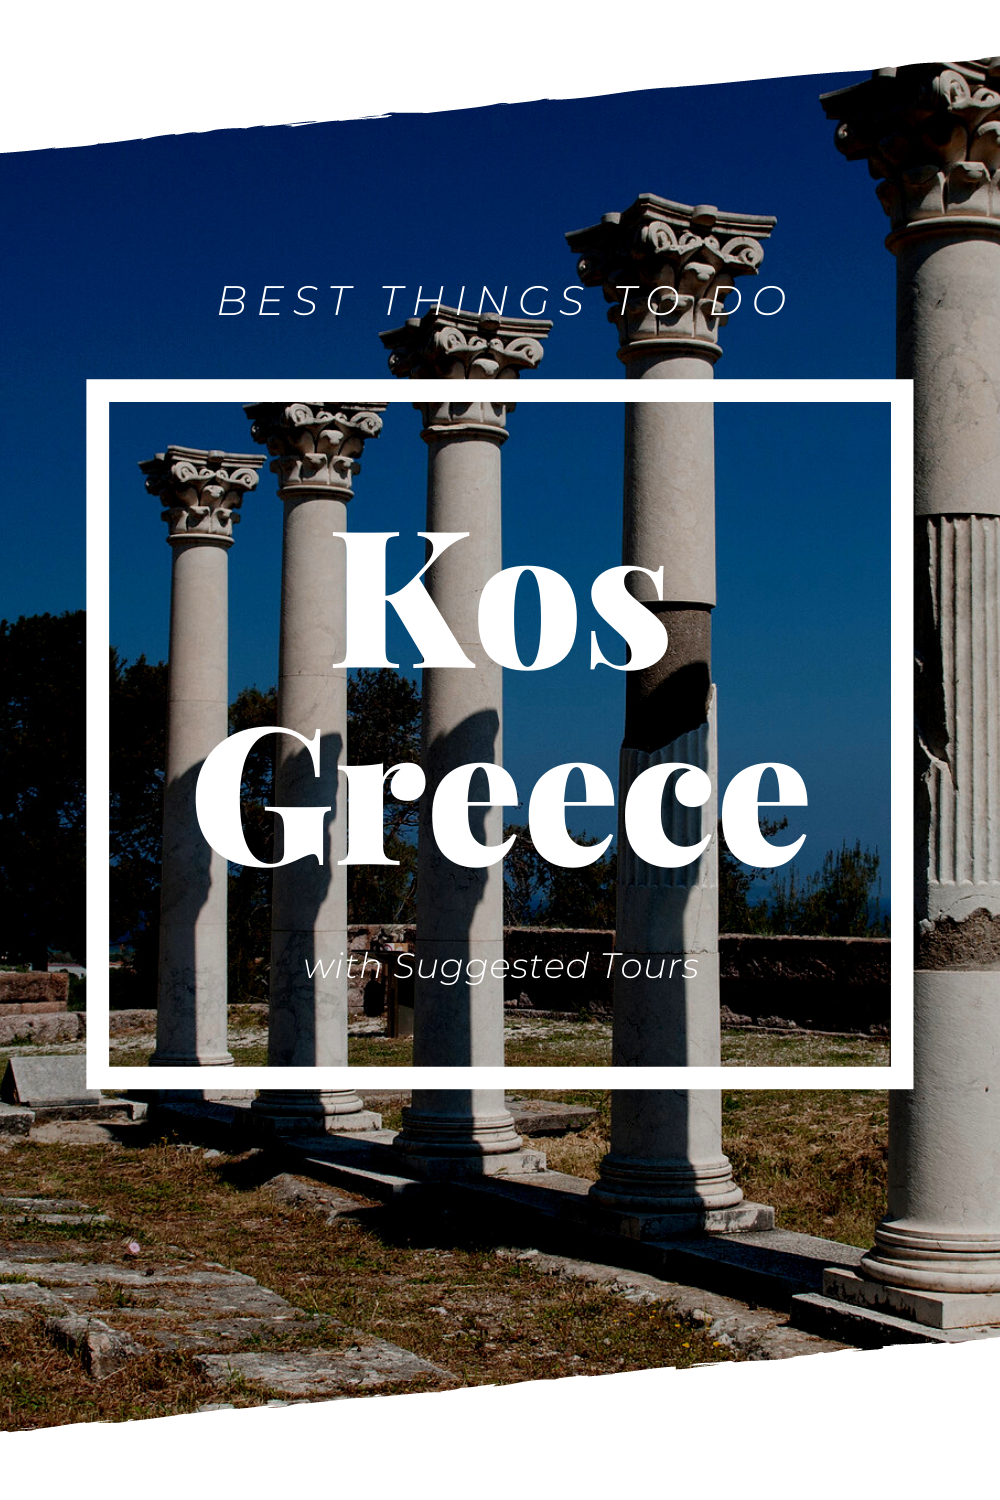 10 Best Things to do in Kos, Greece